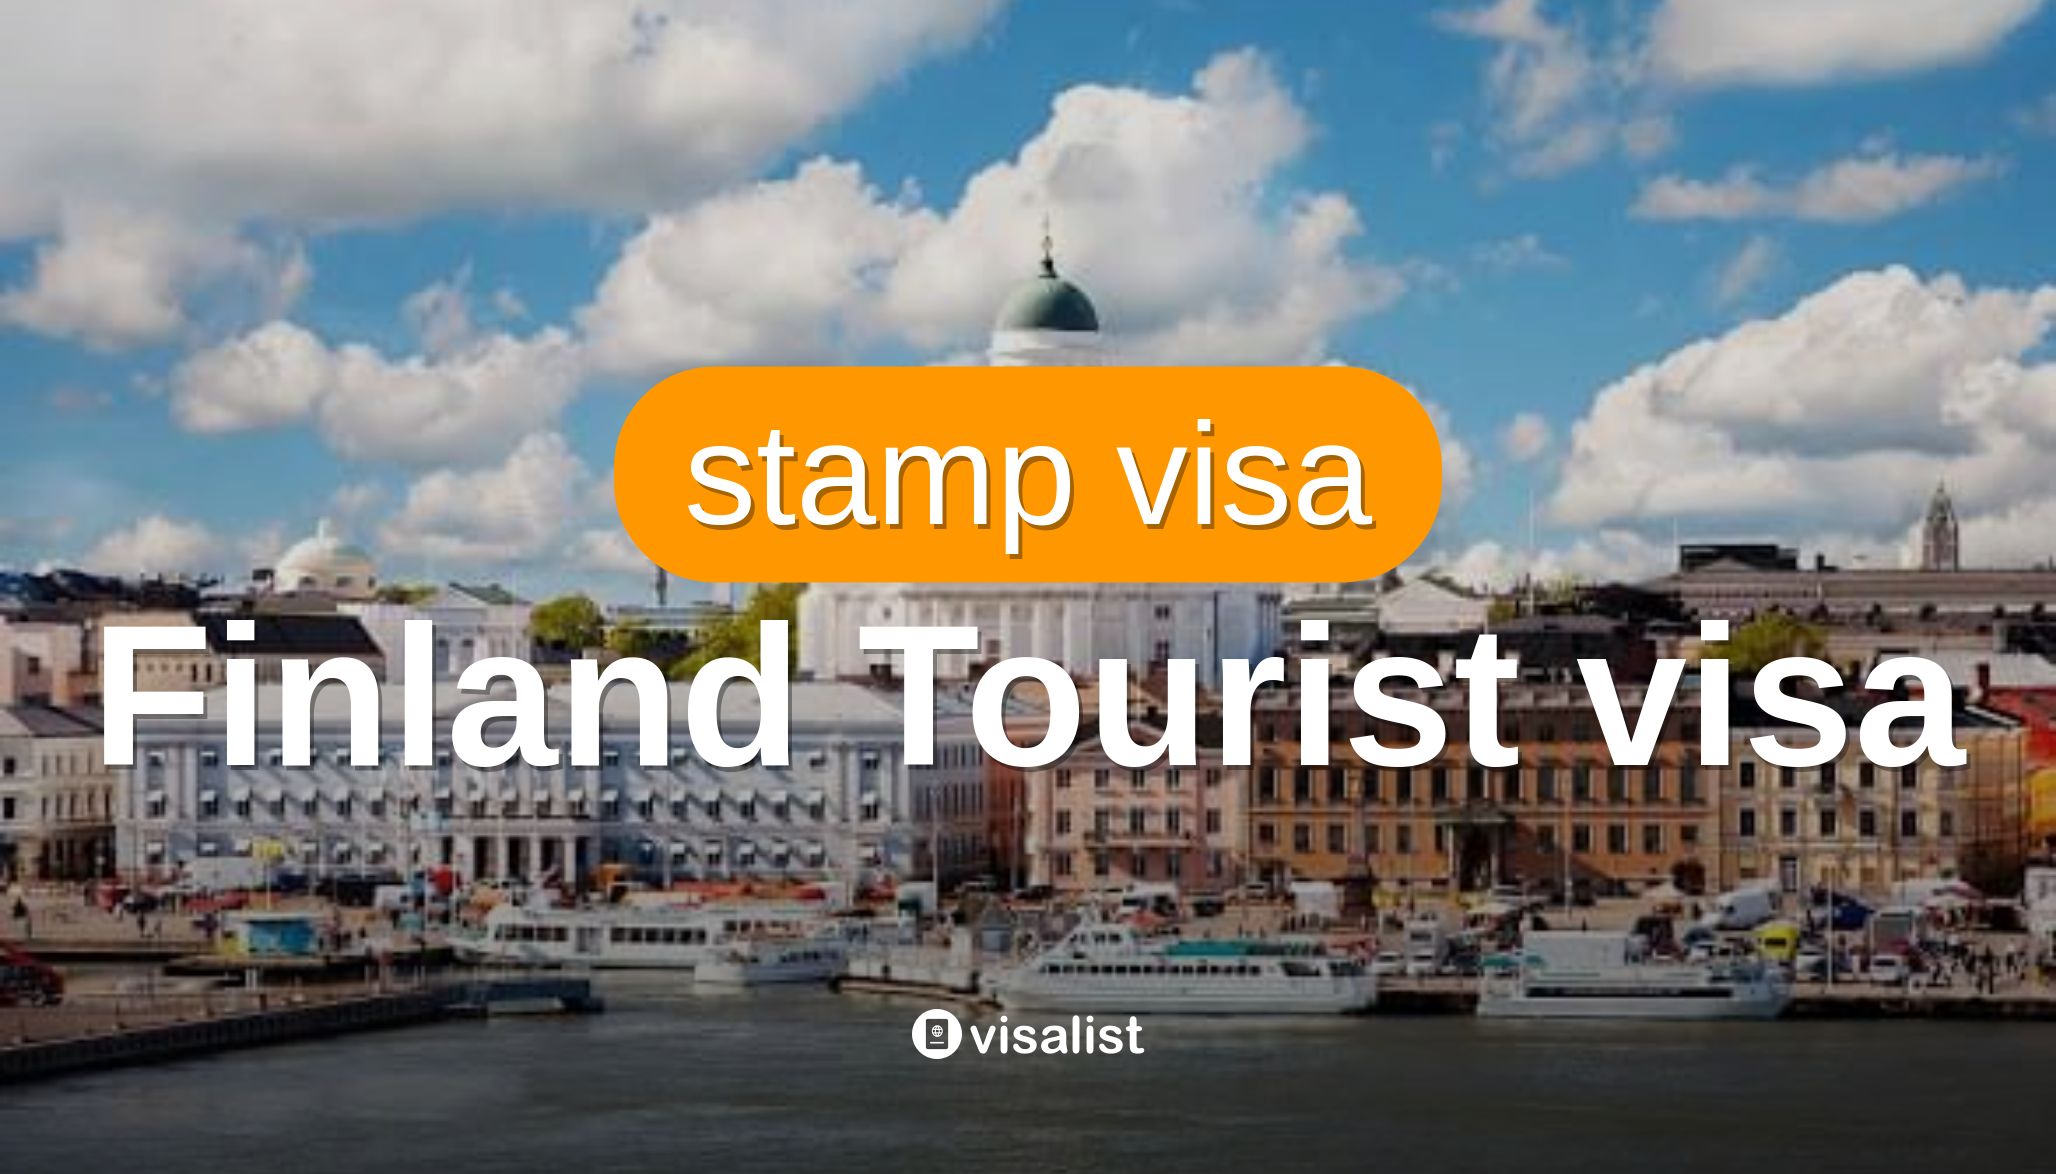 finland tourist visa from india cost